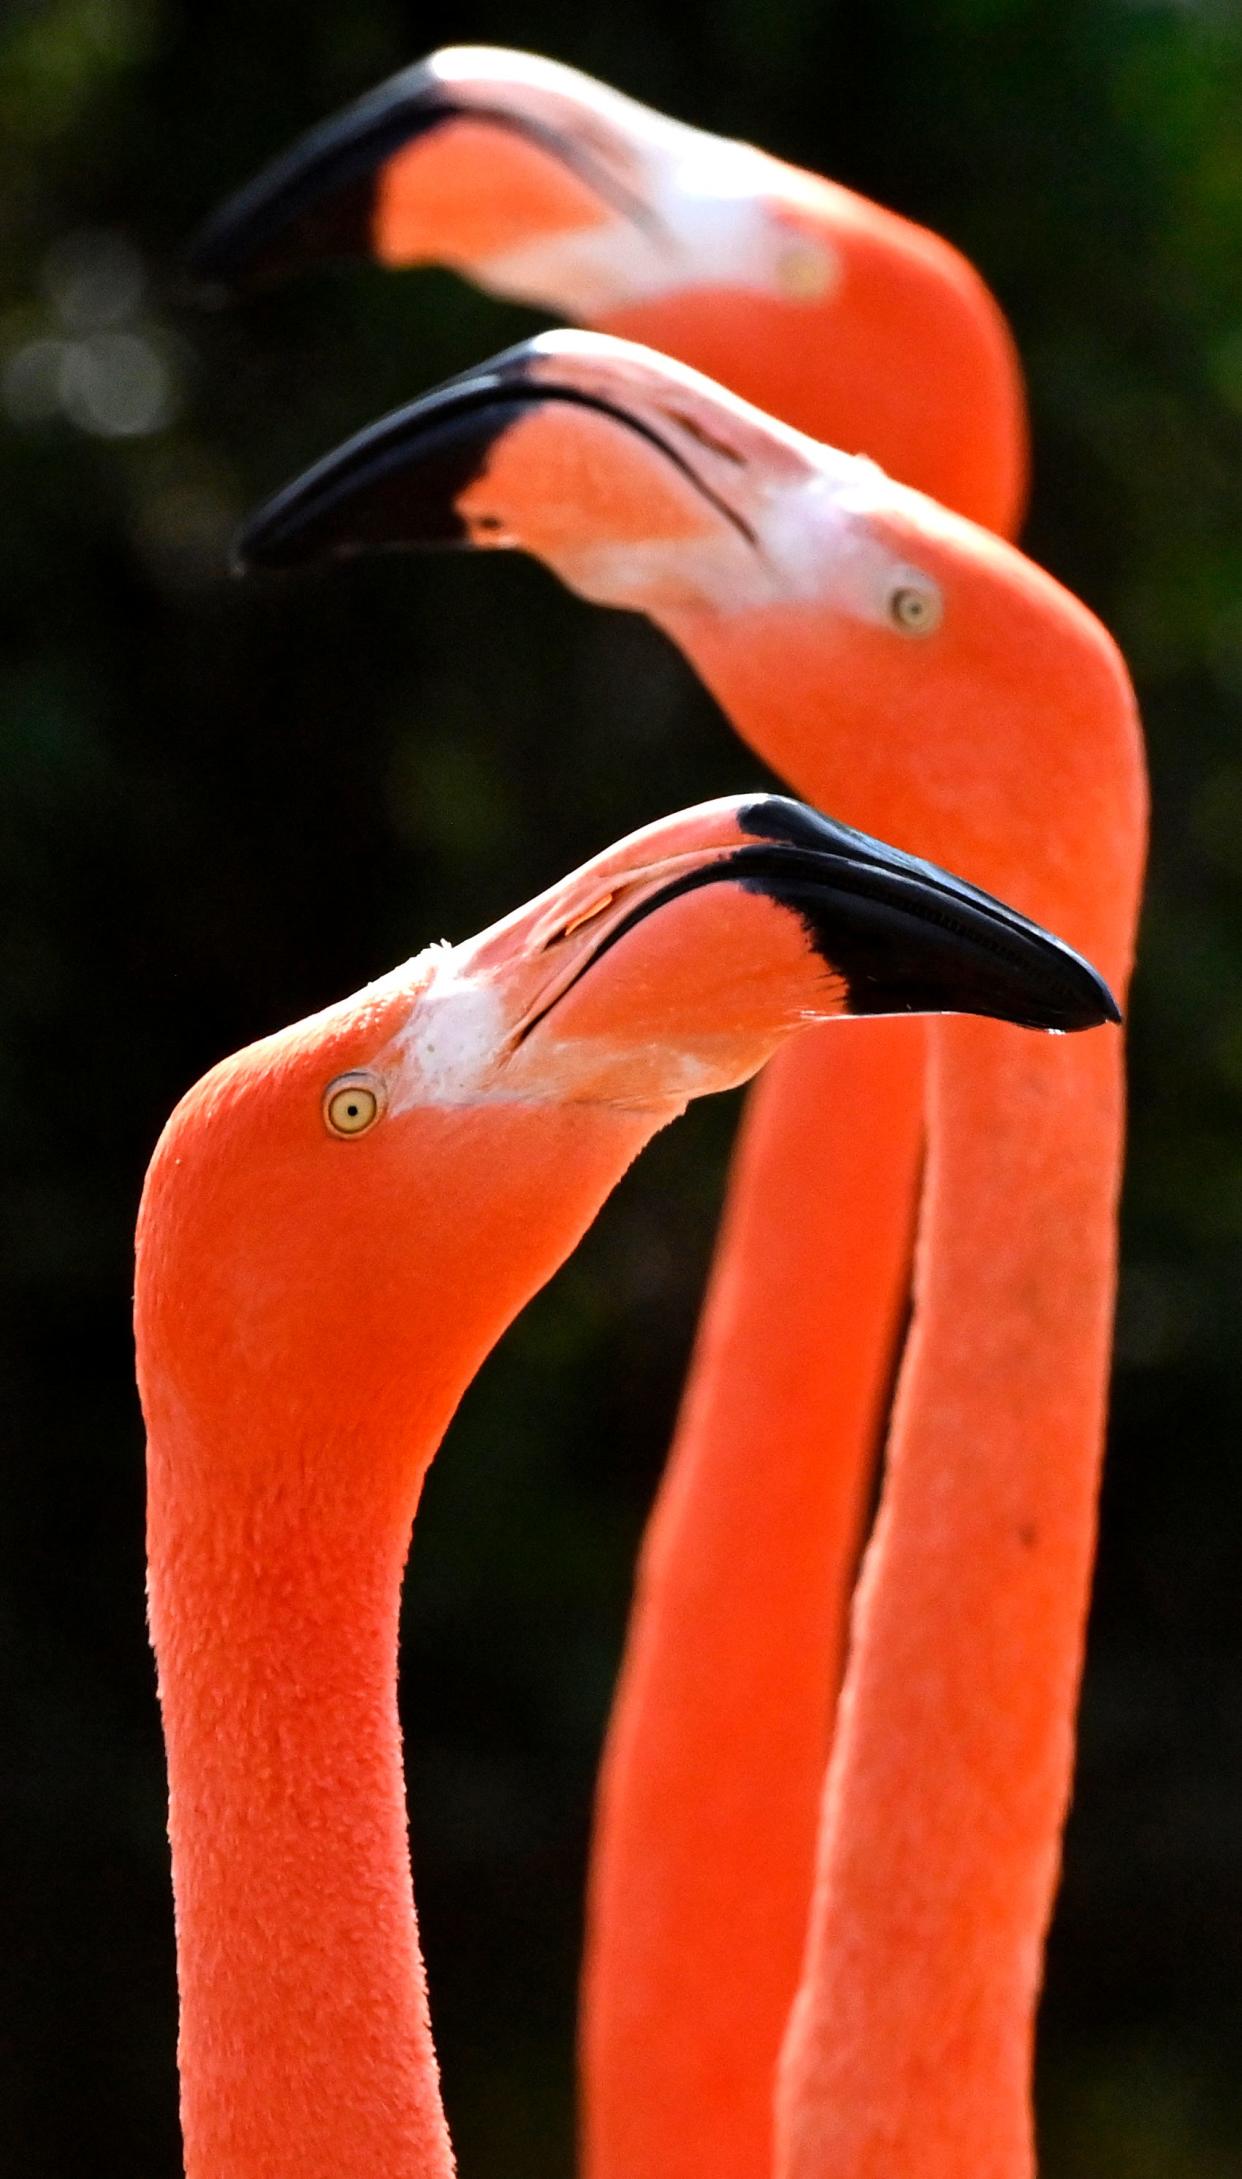 Caribbean Flamingos prance within their enclosure at the Abilene Zoo Wednesday. The zoo’s Wild Days during spring break featured special demonstrations and lectures covering a wide variety of the facility’s feathered, furred, slimy or scaled residents.